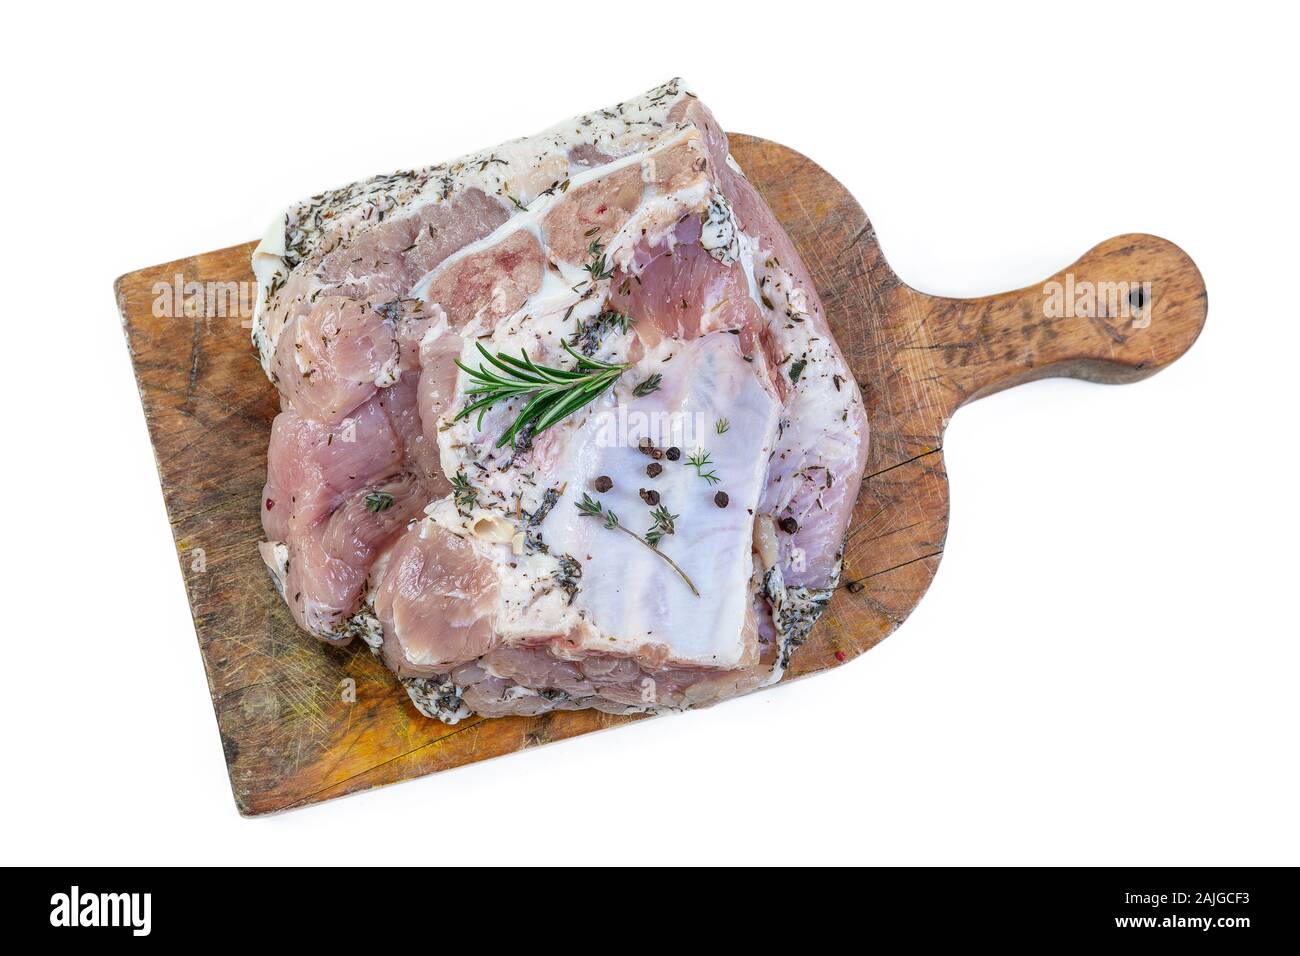 Big piece of salted streaky pork belly with skin different sizes on a white background Stock Photo